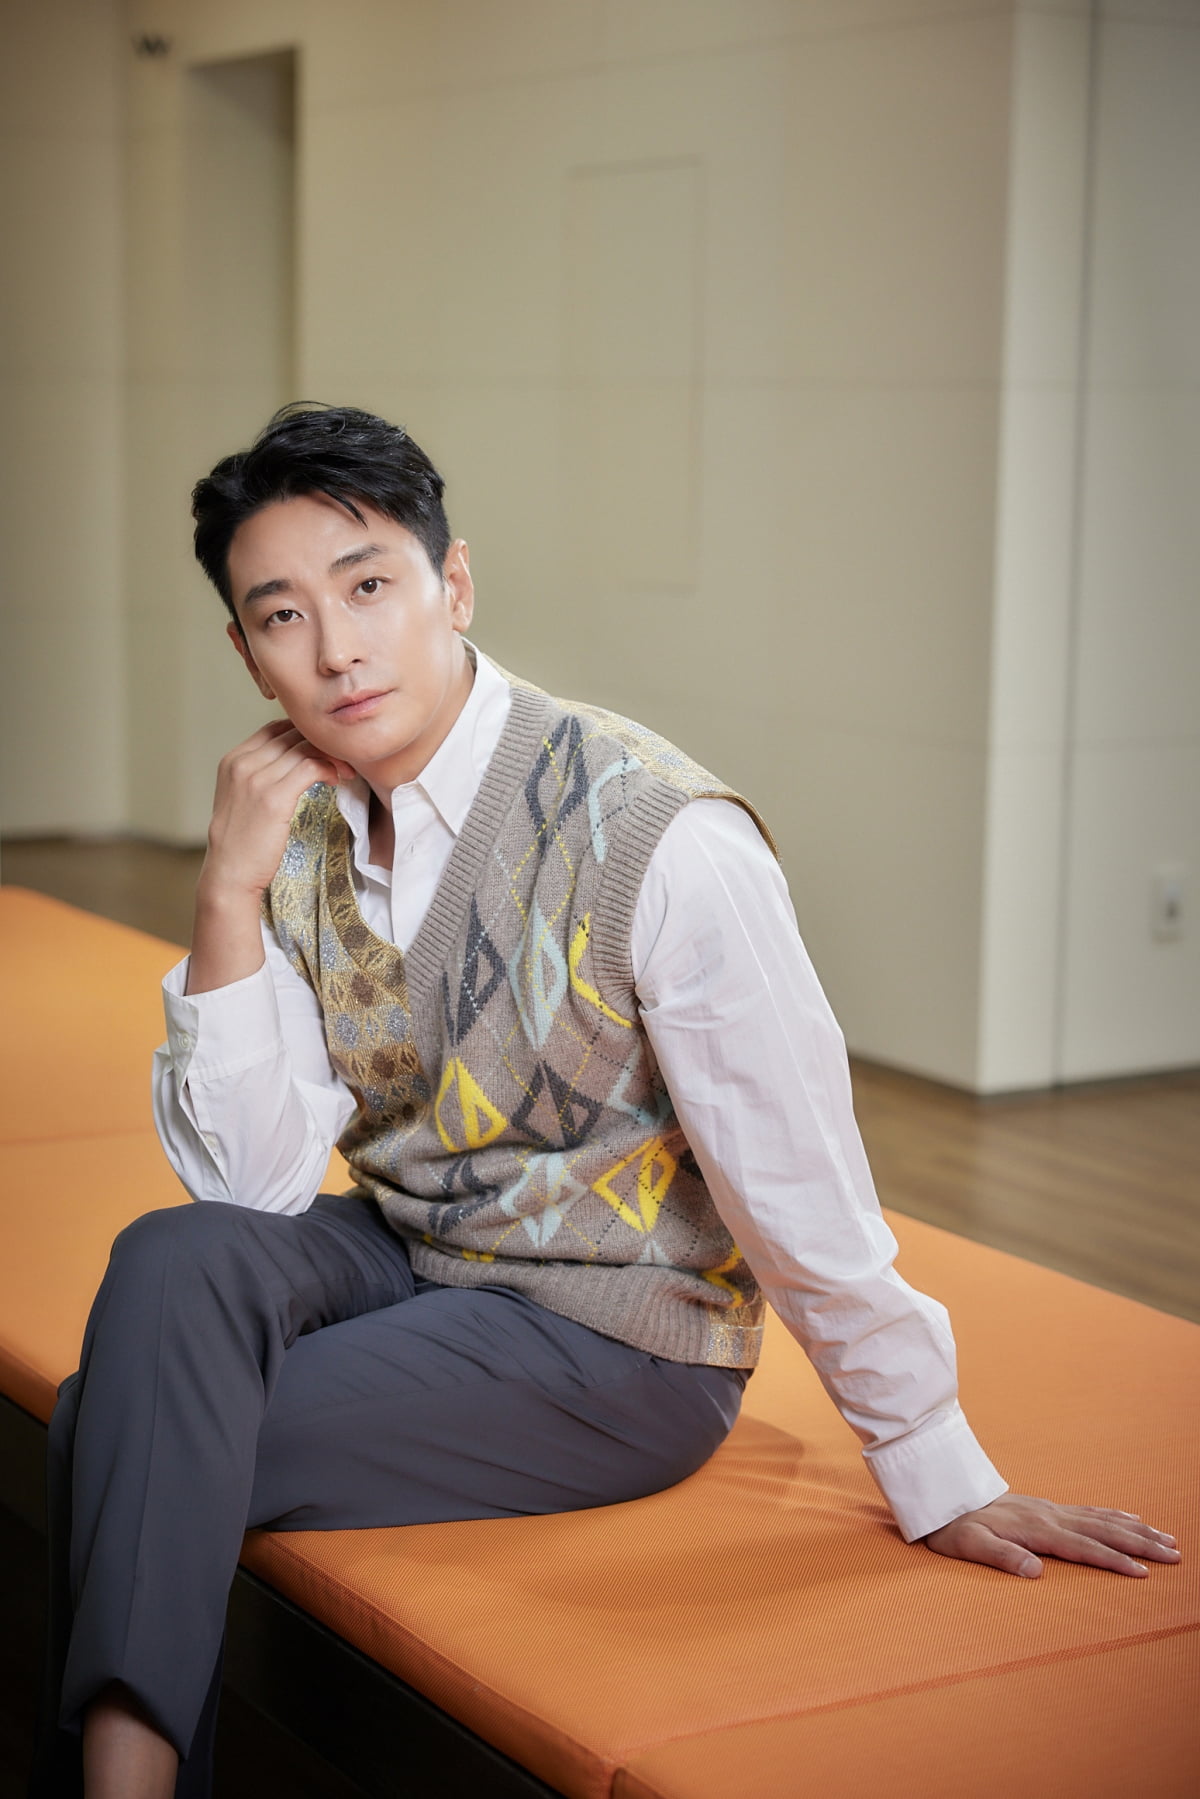 Actor Joo Ji-hoon, "I'm grateful to be compared to Tom Cruise and action scenes"